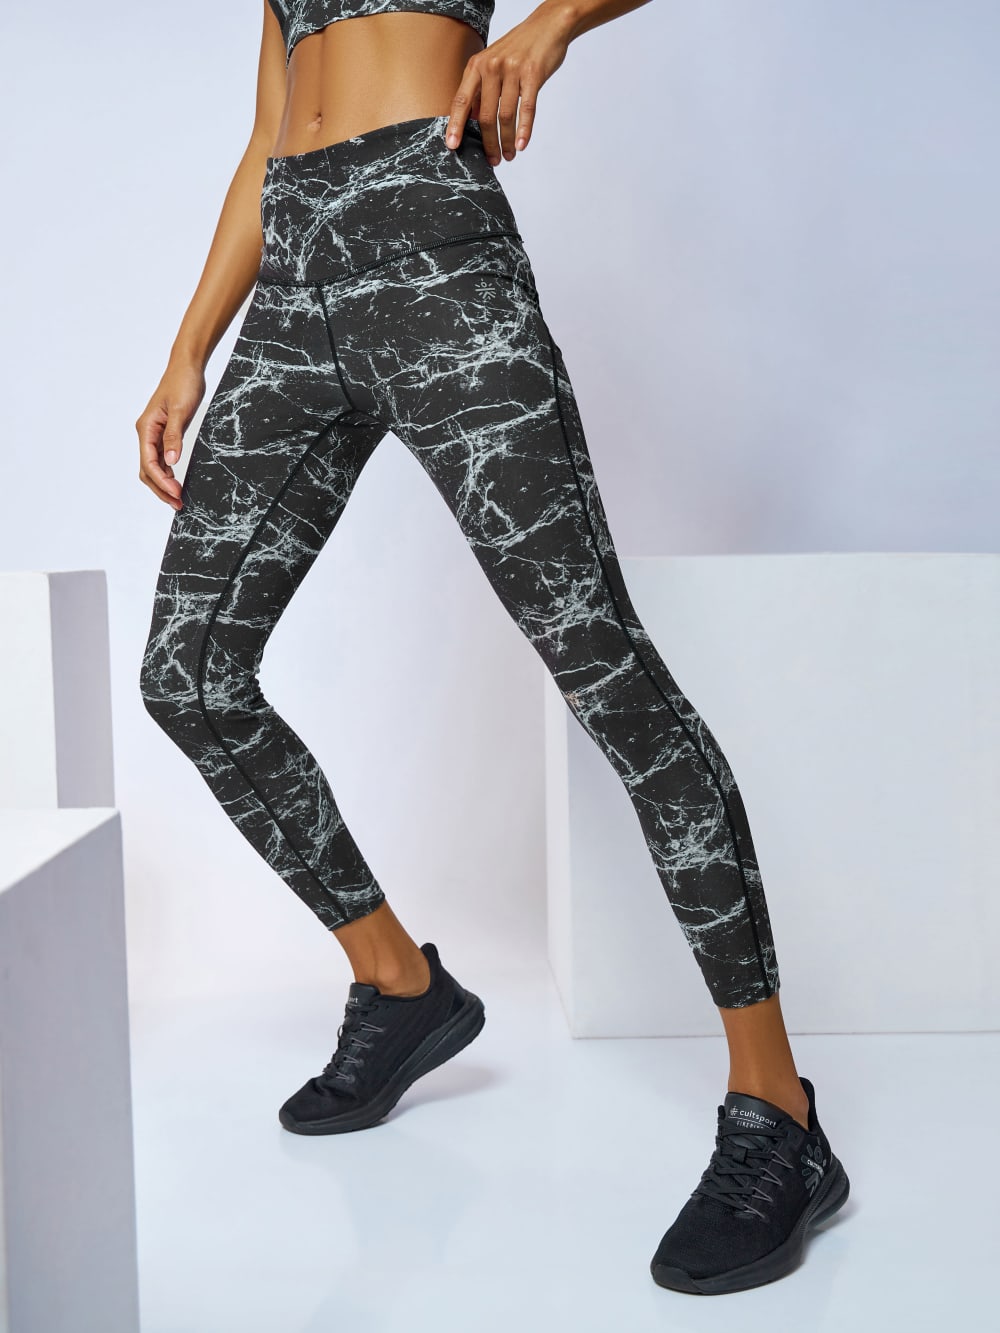 Women's size small, gray/black marble print Pop fit leggings with